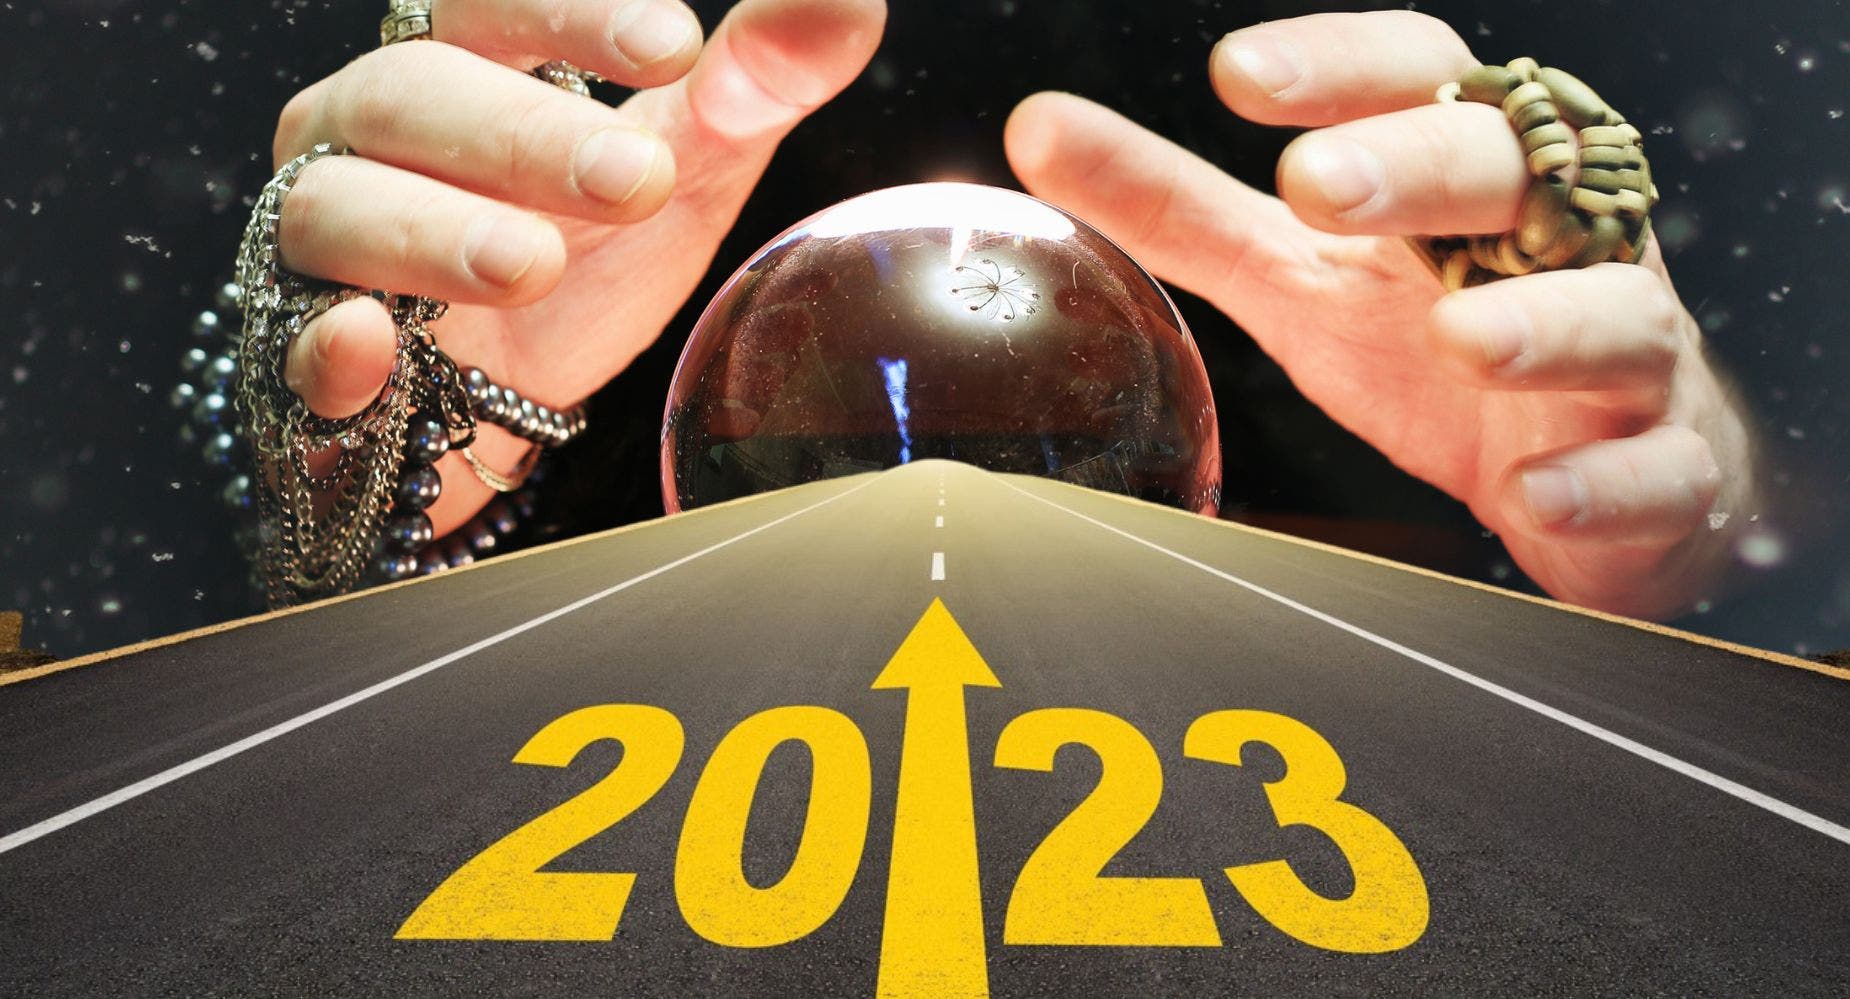 2023 Predictions From Standard Chartered: Bitcoin $5,000, Gold Soars, And Trouble For Biden